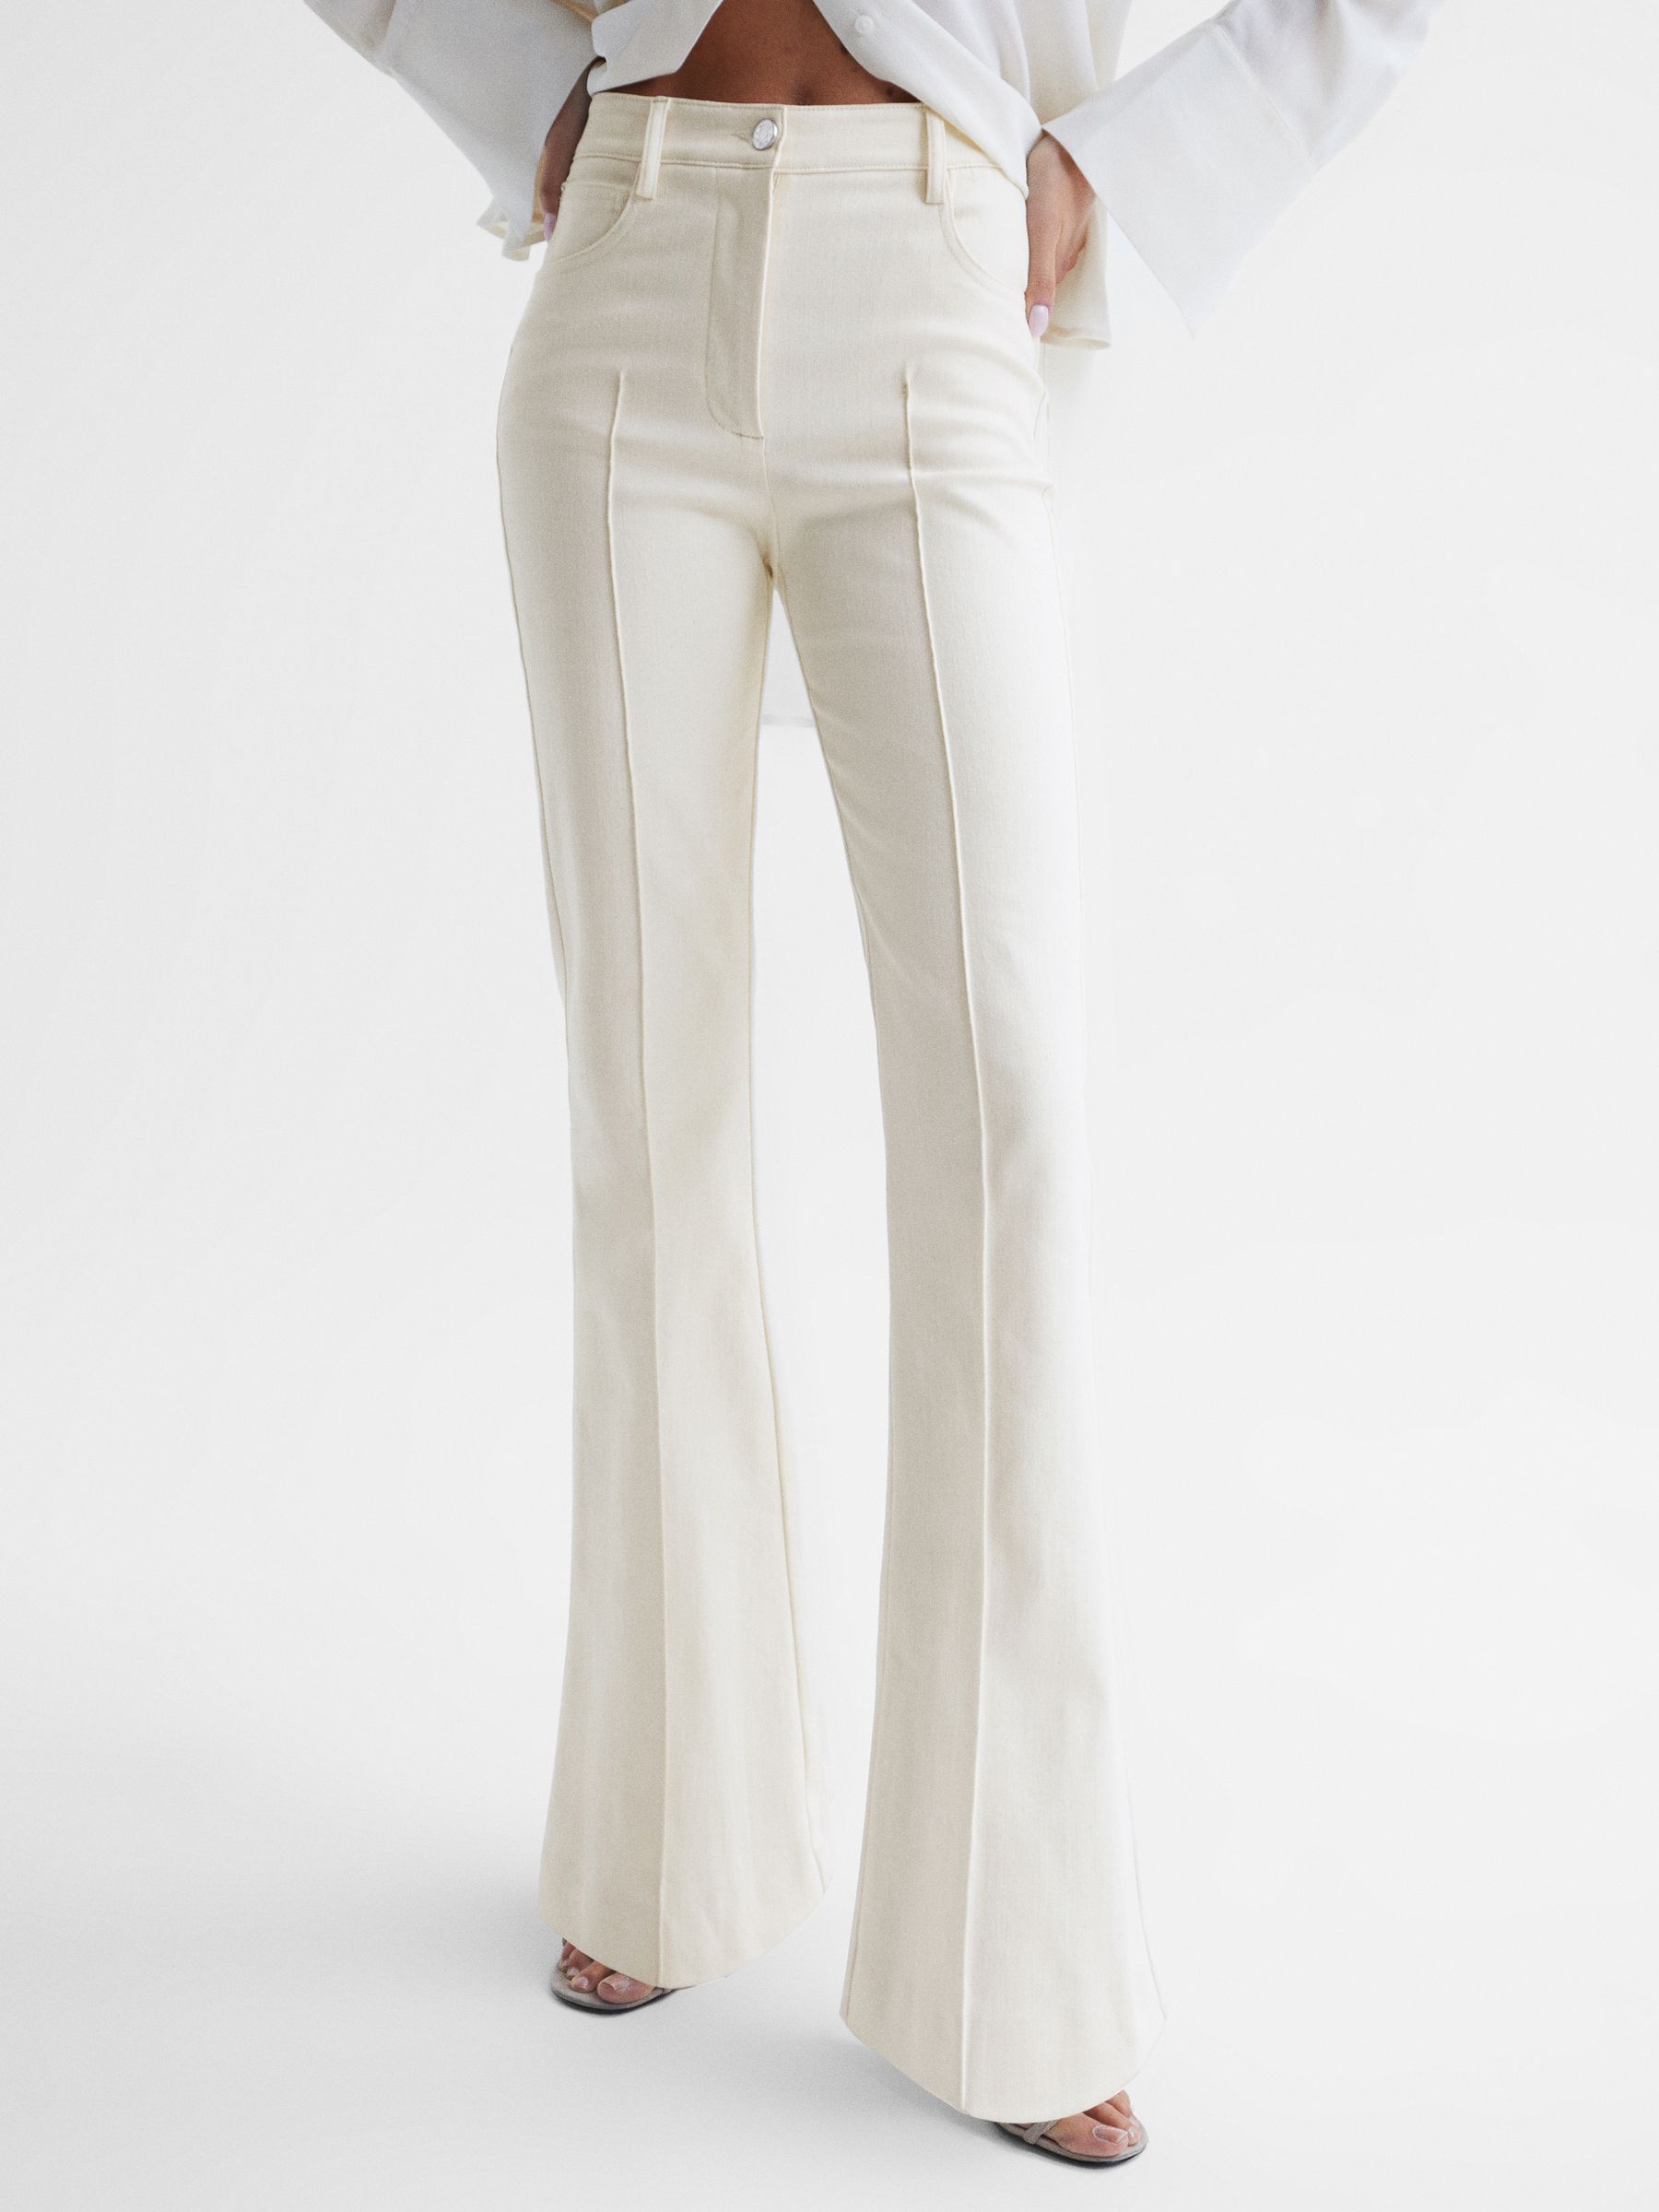 Reiss Florence High Rise Flared Trousers - REISS